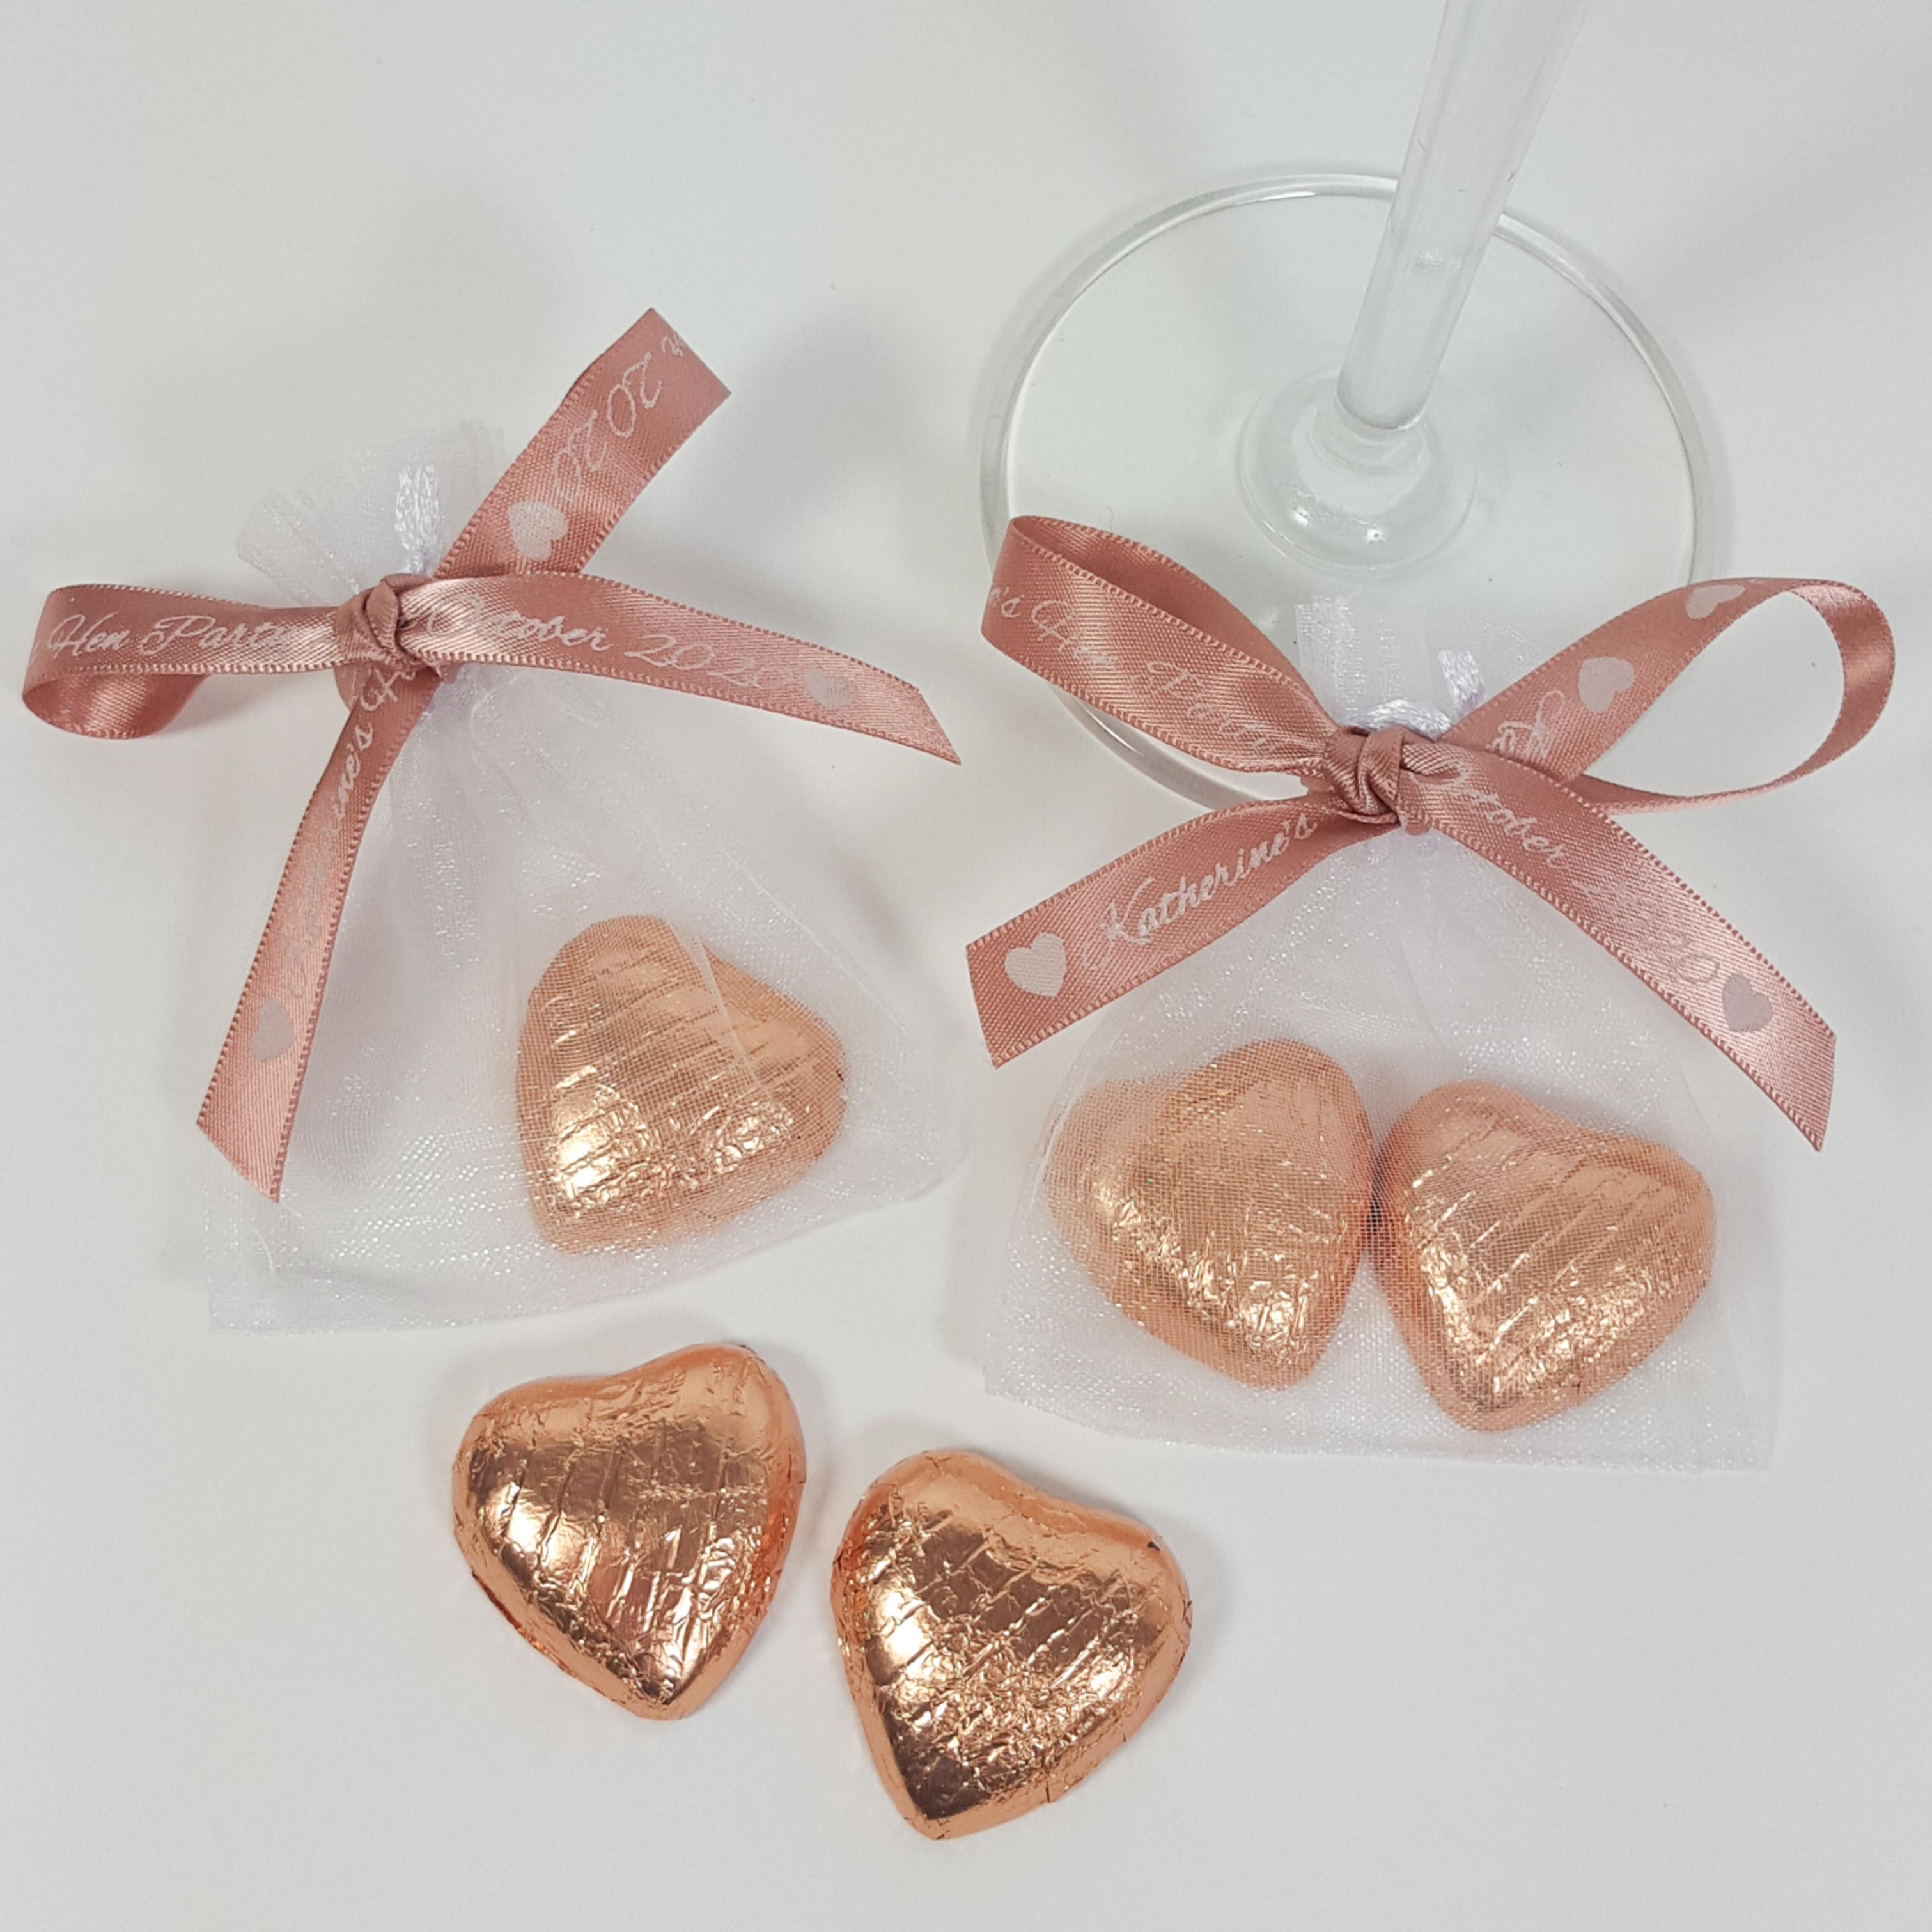 Hen Party Chocolate favours